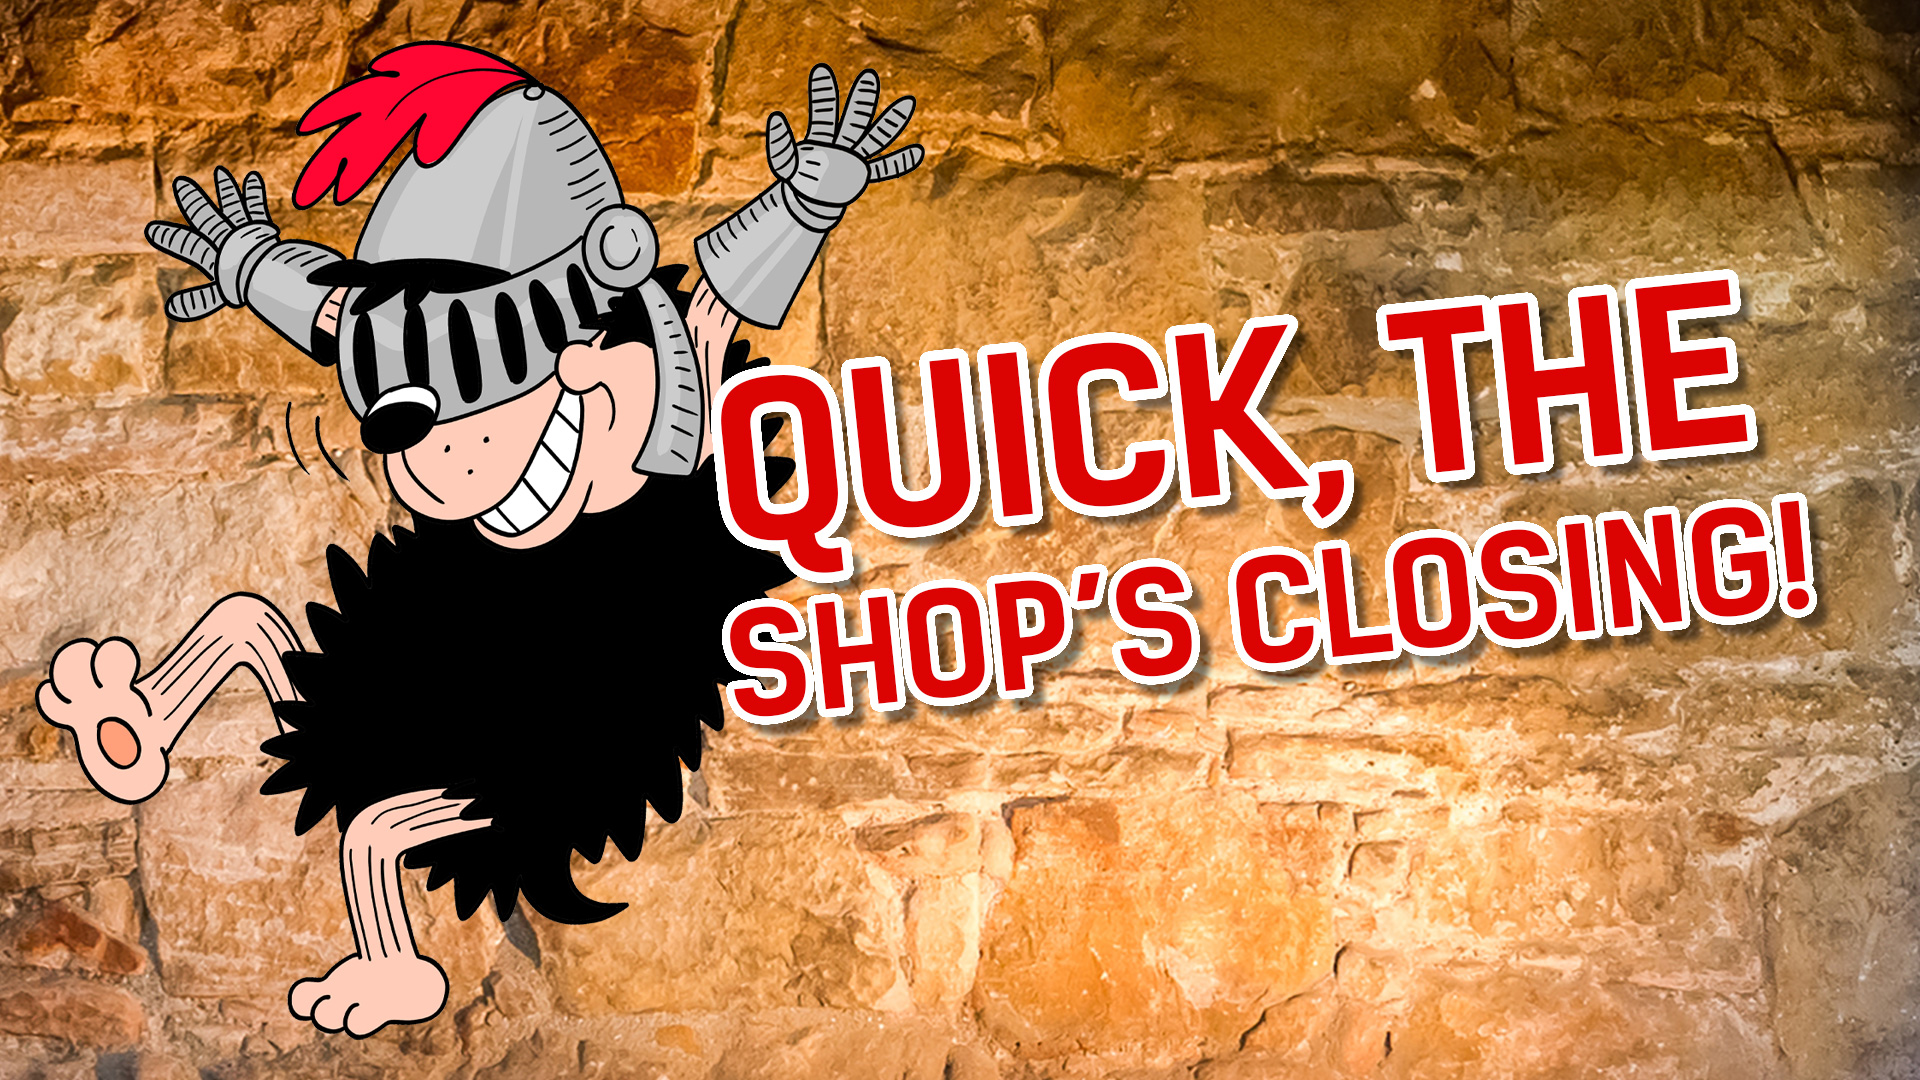 Result: Quick, the shop's closing!